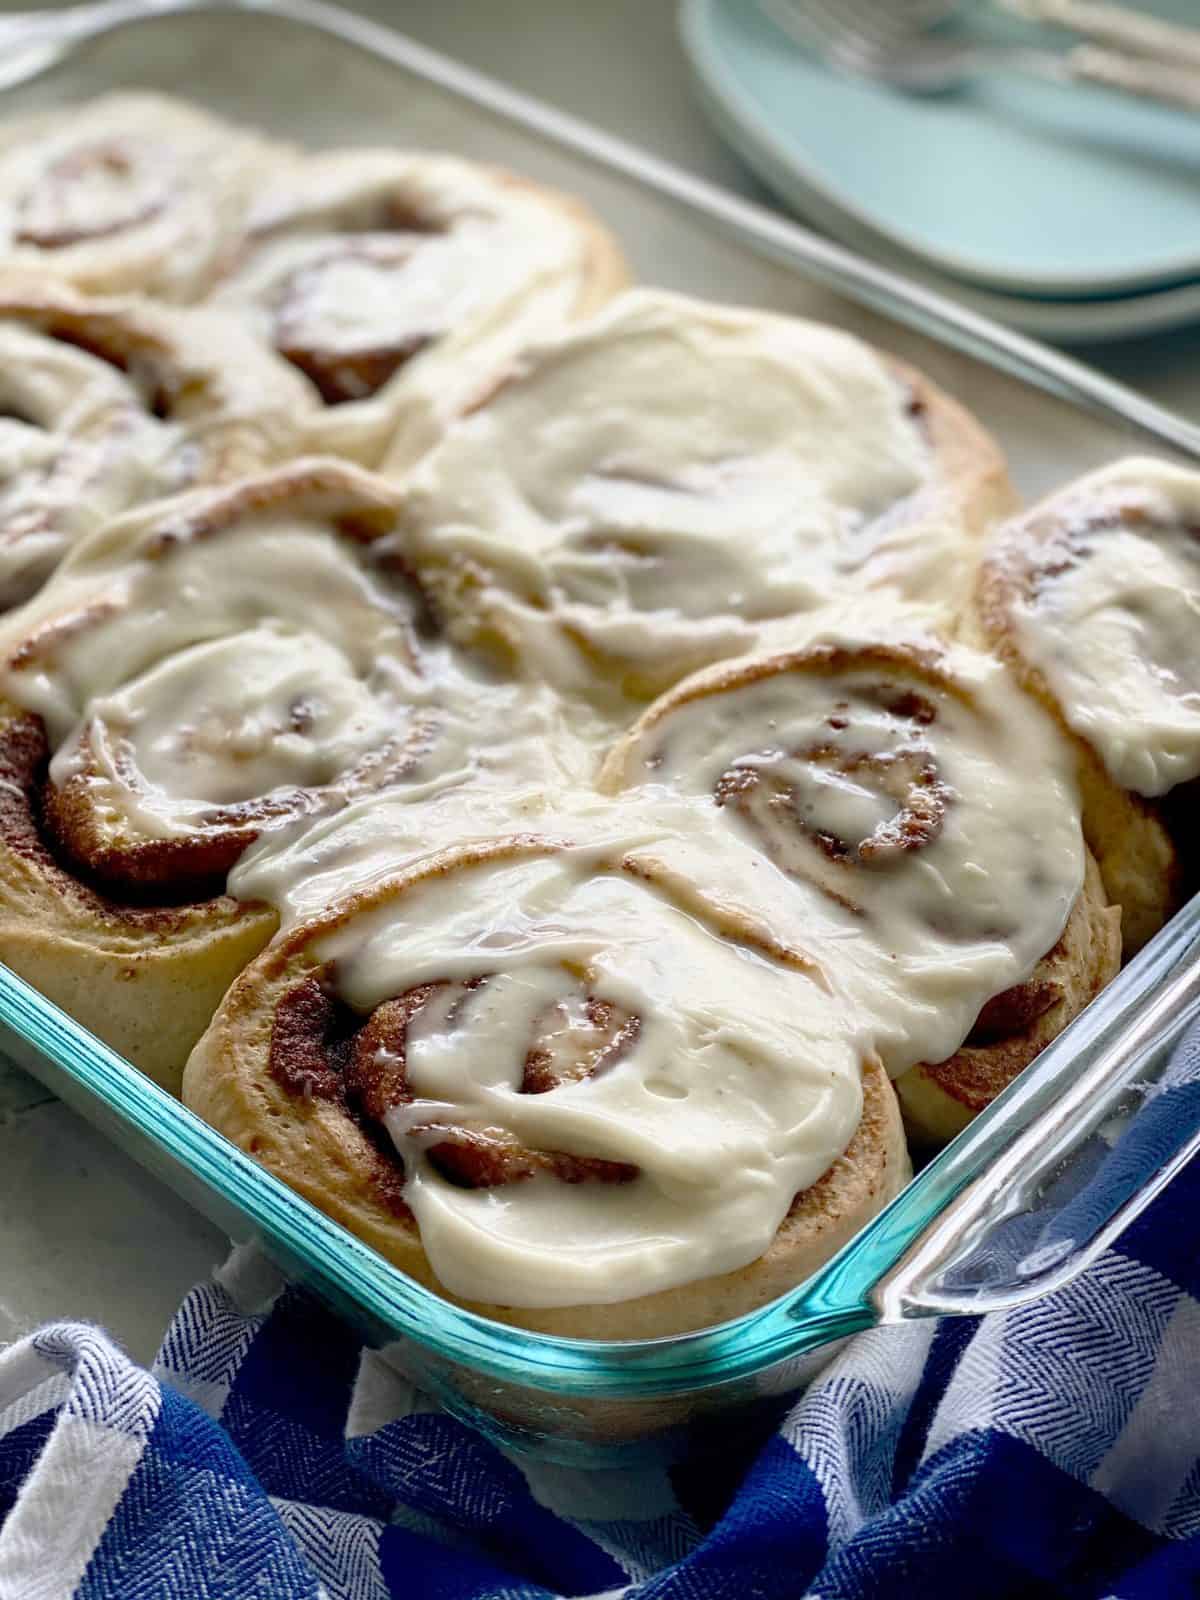 Glass baking dish with frosted cinnamon rolls.